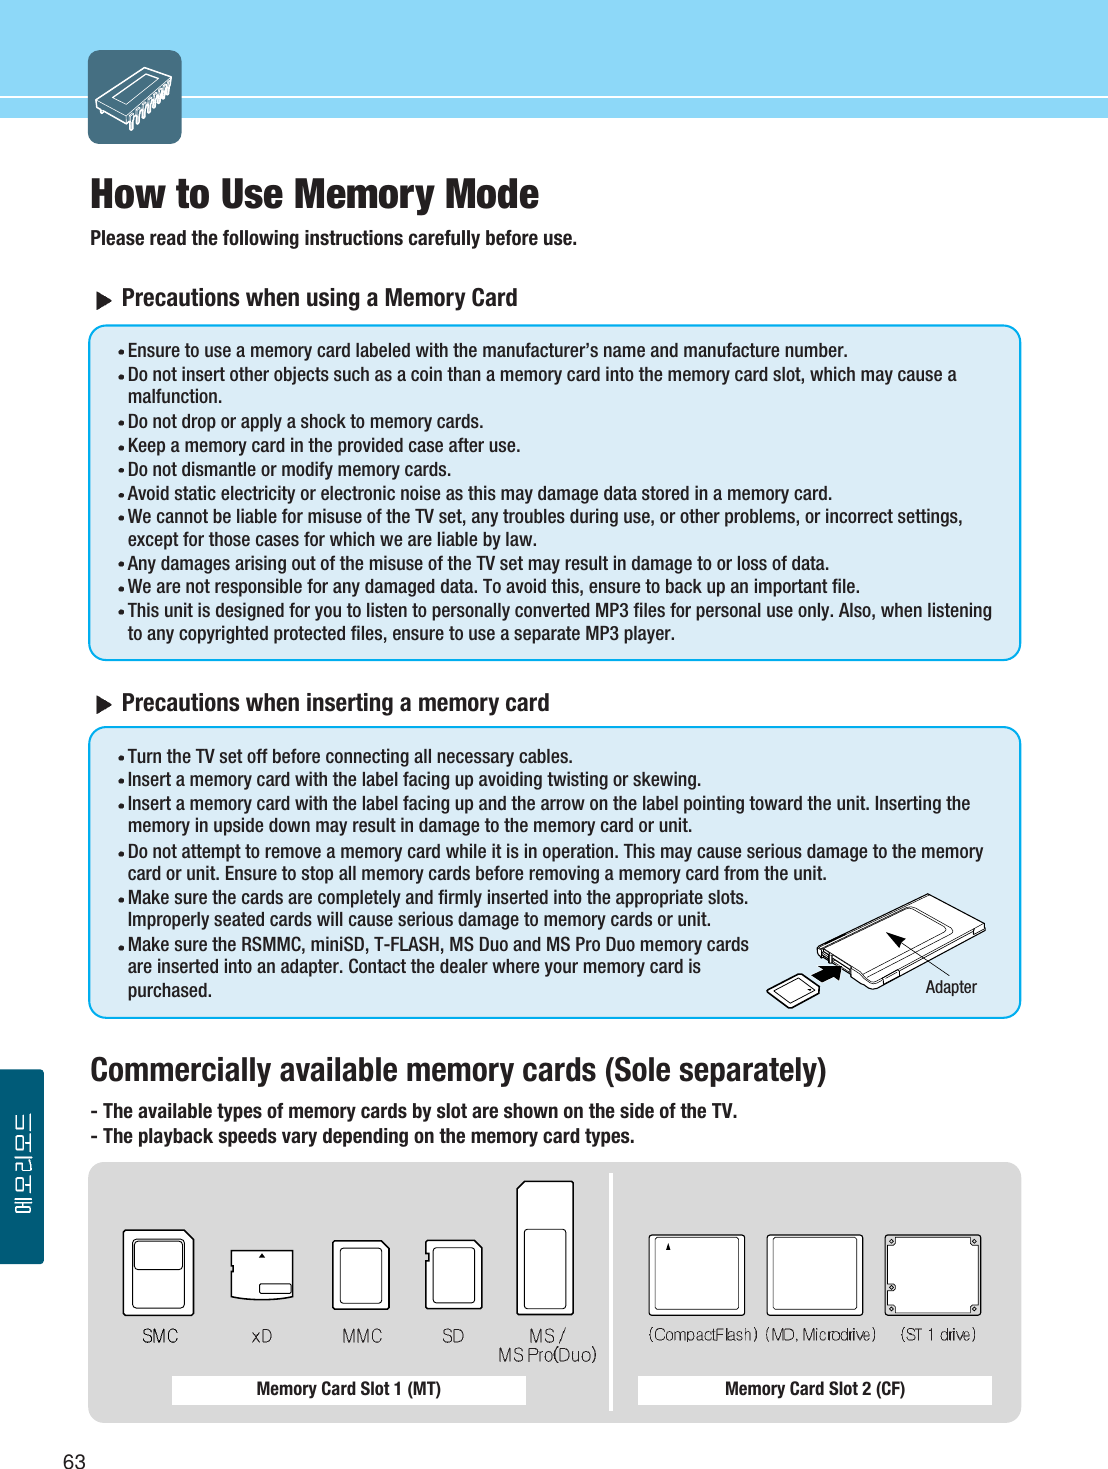 63Memory Card Slot 1 (MT) Memory Card Slot 2 (CF)How to Use Memory ModePlease read the following instructions carefully before use.Precautions when using a Memory CardEnsure to use a memory card labeled with the manufacturer’s name and manufacture number.Do not insert other objects such as a coin than a memory card into the memory card slot, which may cause amalfunction.Do not drop or apply a shock to memory cards.Keep a memory card in the provided case after use.Do not dismantle or modify memory cards.Avoid static electricity or electronic noise as this may damage data stored in a memory card. We cannot be liable for misuse of the TV set, any troubles during use, or other problems, or incorrect settings,except for those cases for which we are liable by law.Any damages arising out of the misuse of the TV set may result in damage to or loss of data.We are not responsible for any damaged data. To avoid this, ensure to back up an important file.This unit is designed for you to listen to personally converted MP3 files for personal use only. Also, when listeningto any copyrighted protected files, ensure to use a separate MP3 player. Precautions when inserting a memory cardTurn the TV set off before connecting all necessary cables.Insert a memory card with the label facing up avoiding twisting or skewing.Insert a memory card with the label facing up and the arrow on the label pointing toward the unit. Inserting thememory in upside down may result in damage to the memory card or unit.Do not attempt to remove a memory card while it is in operation. This may cause serious damage to the memorycard or unit. Ensure to stop all memory cards before removing a memory card from the unit.Make sure the cards are completely and firmly inserted into the appropriate slots.Improperly seated cards will cause serious damage to memory cards or unit. Make sure the RSMMC, miniSD, T-FLASH, MS Duo and MS Pro Duo memory cardsare inserted into an adapter. Contact the dealer where your memory card ispurchased.Commercially available memory cards (Sole separately)- The available types of memory cards by slot are shown on the side of the TV.- The playback speeds vary depending on the memory card types. Adapter